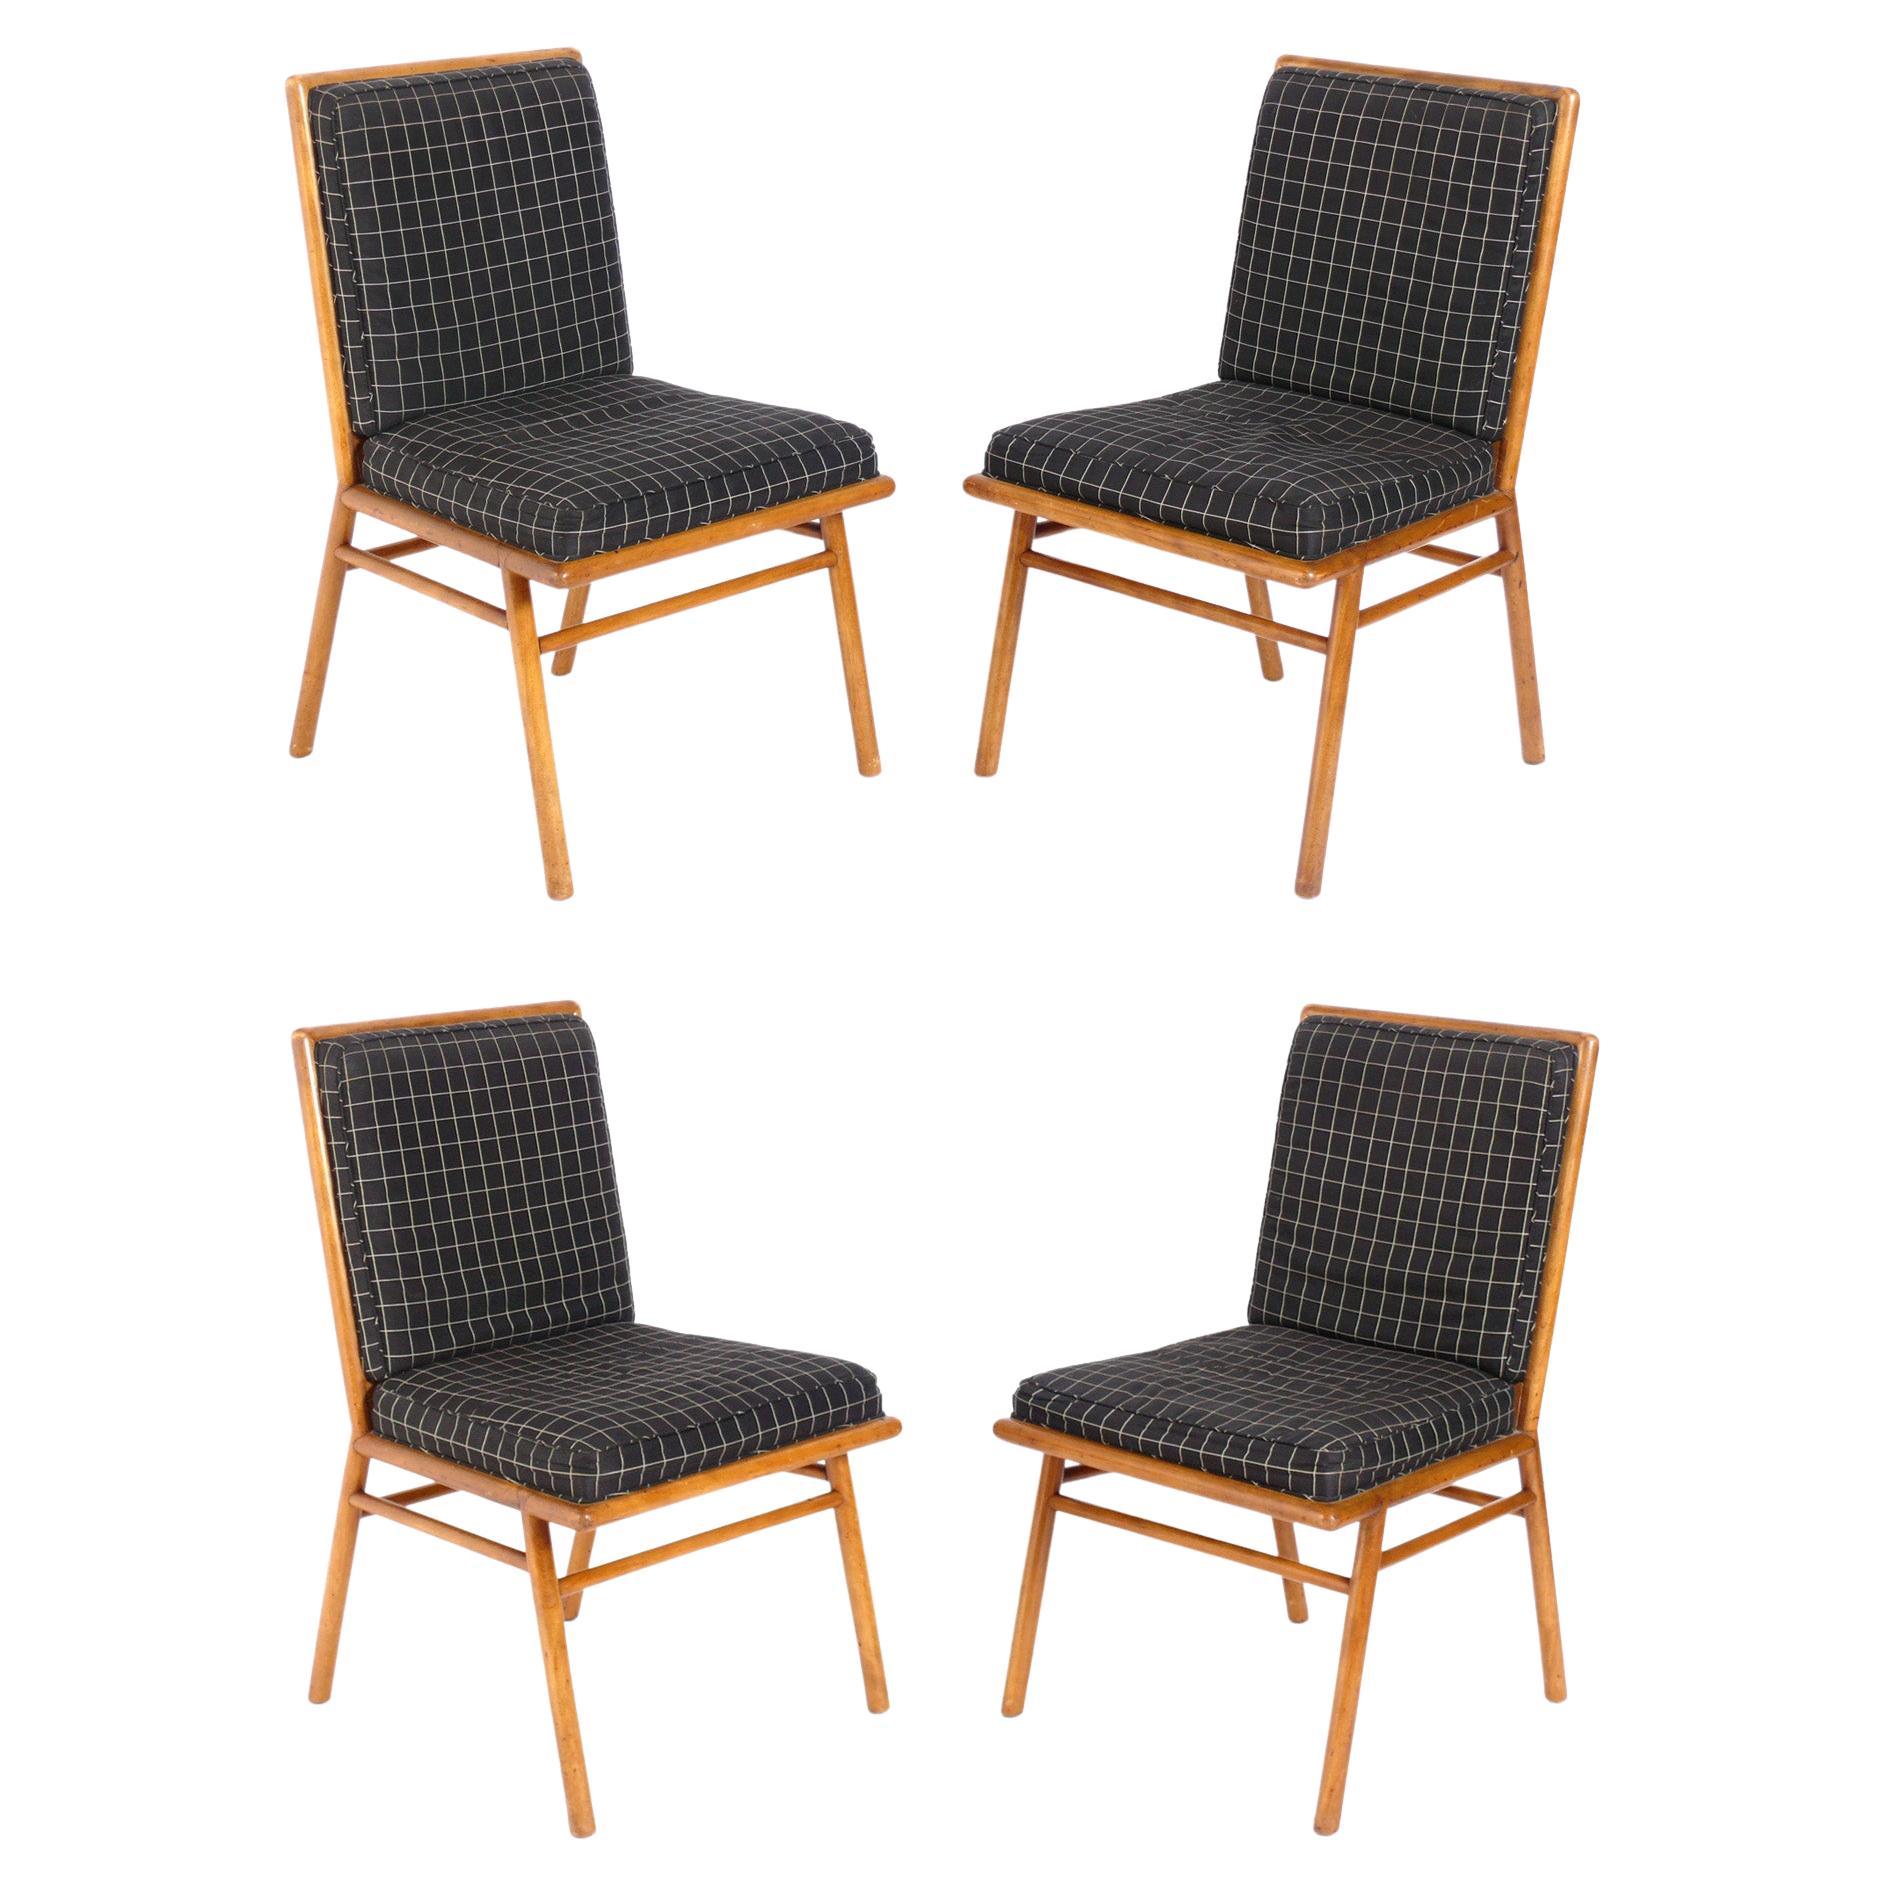 T.H Robsjohn Gibbings Dining Chairs Refinished and Reupholstered